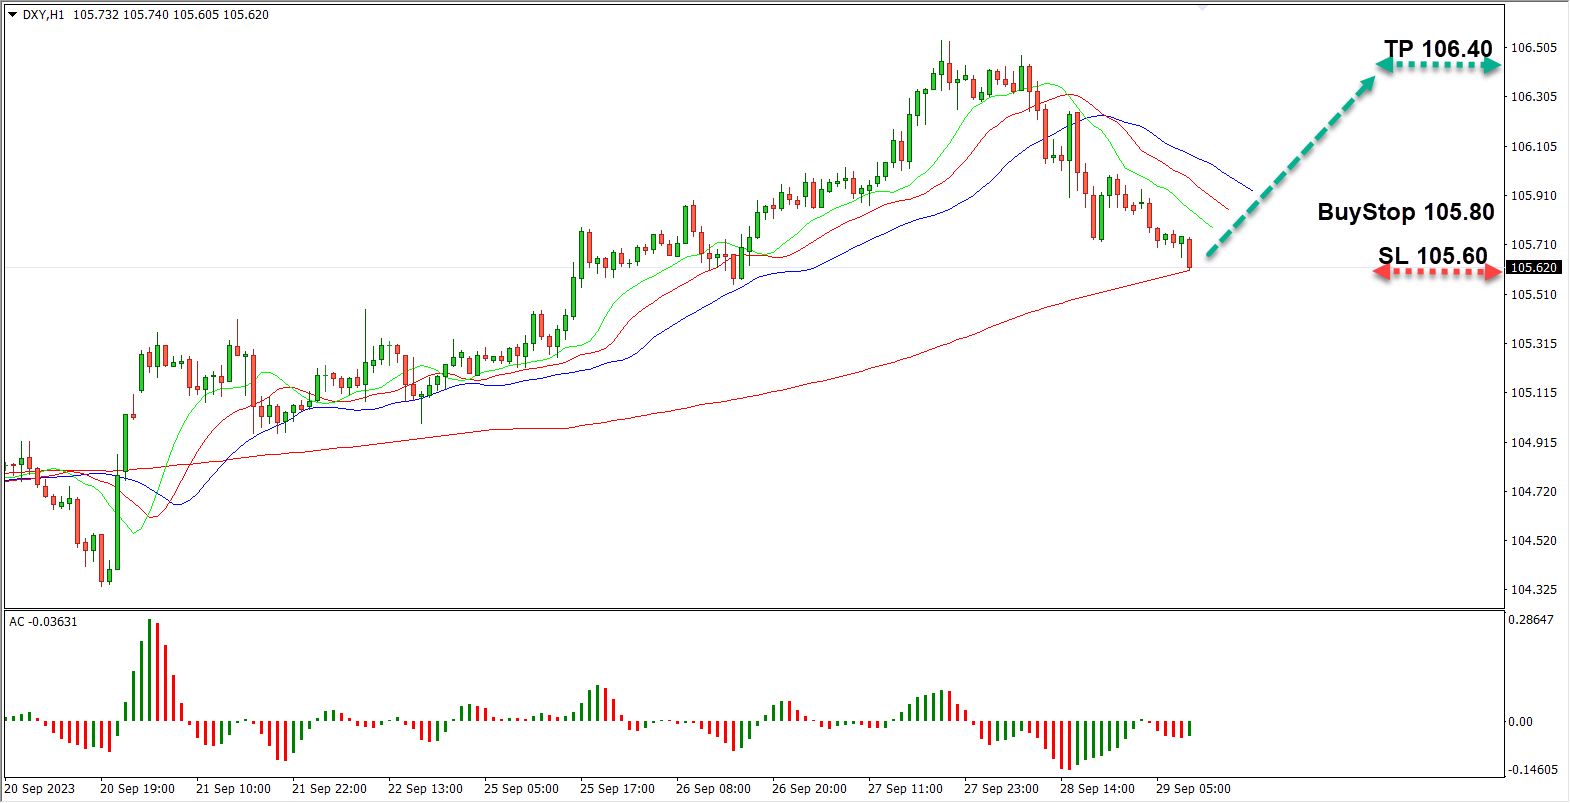 The U.S. dollar index (DXY) is presently exhibiting a trading stance at 105.75